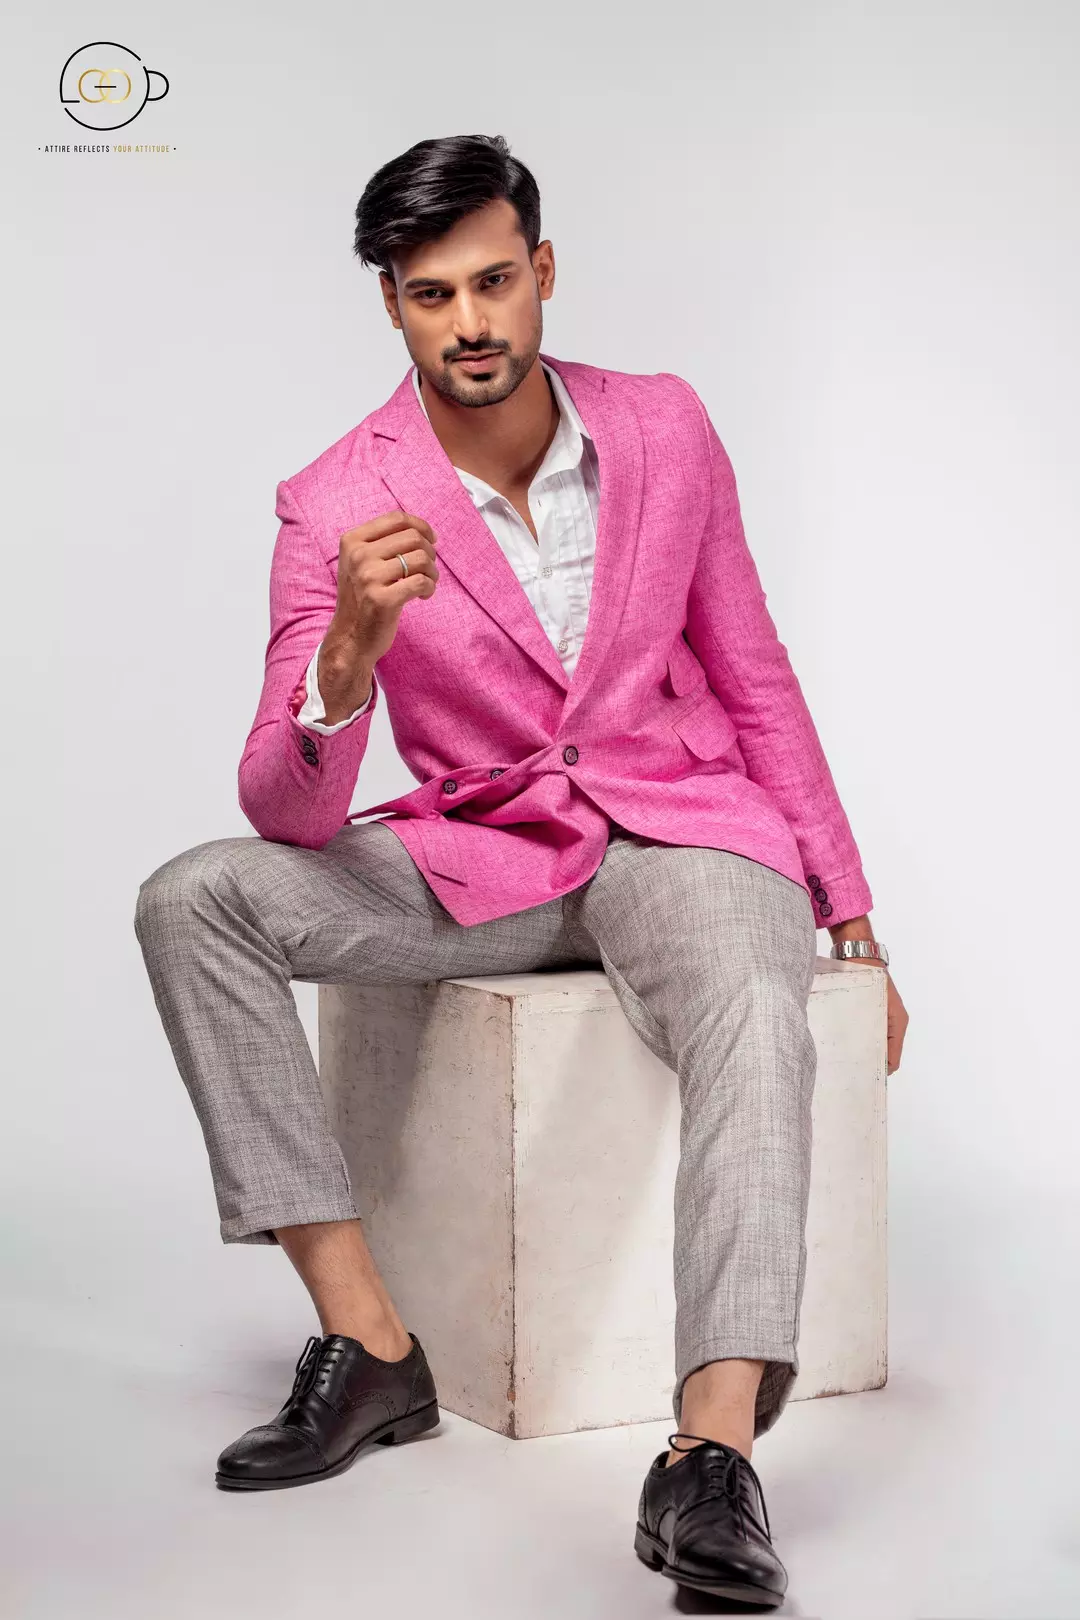 Slim Fit Light Pink Blazer with Attached Belt - Kouri Jewels's Pujo Collection On Sale